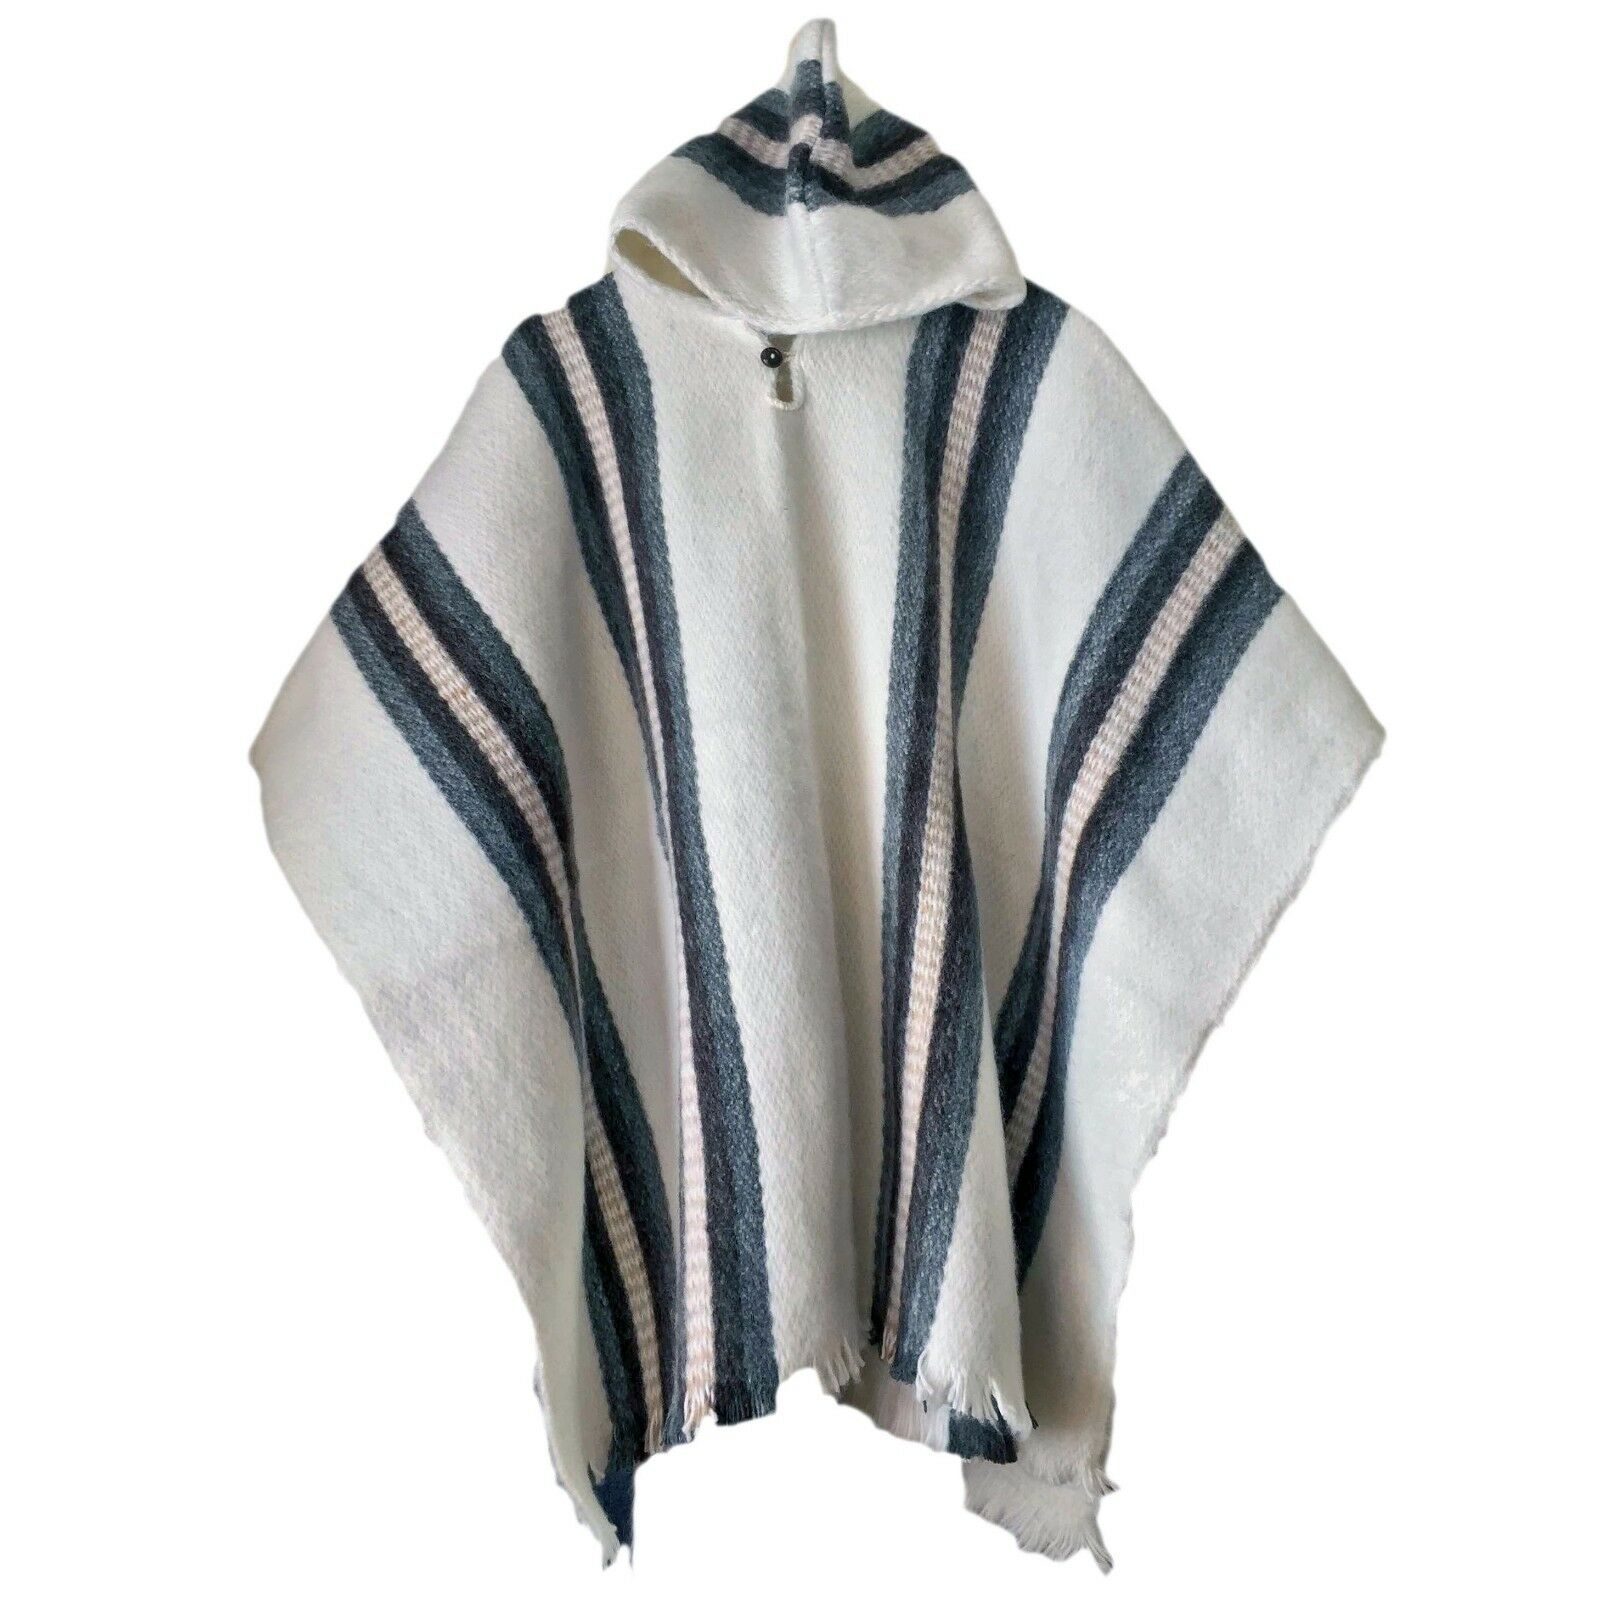 Llama Wool Unisex South American Handwoven Hooded Poncho Pullover ...